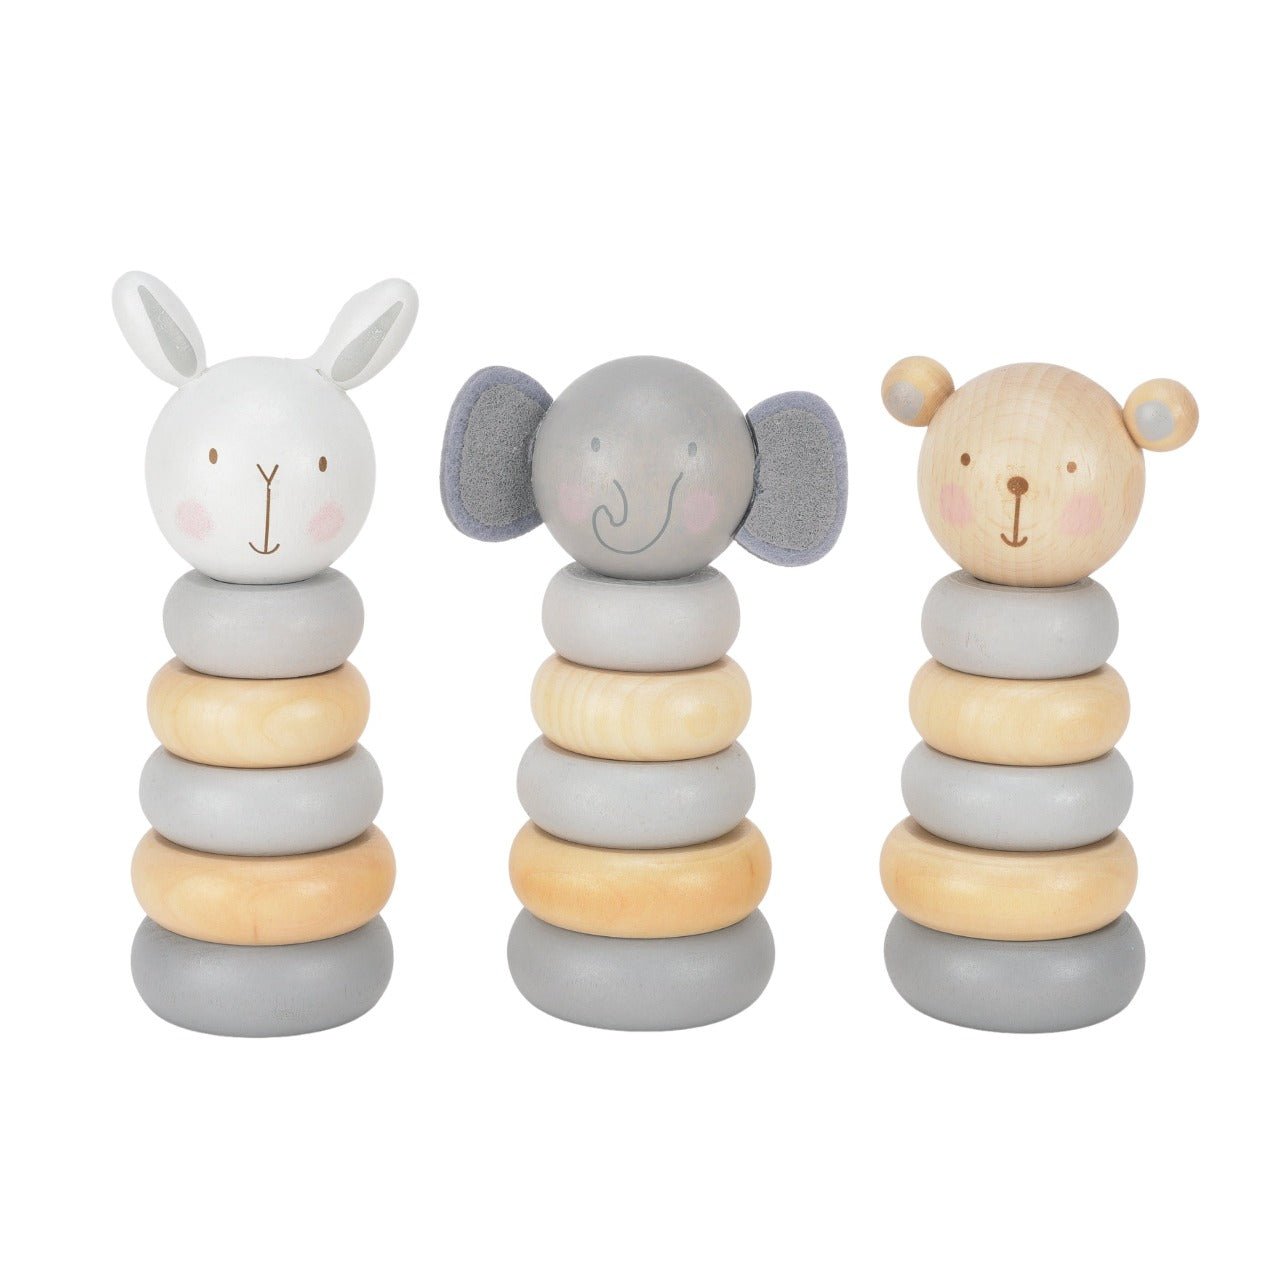 Bambino Wooden Stacking Toy - Bear  Help your little one develop their problem solving and coordination skills with one of these adorable wooden character stacking ring toys. From BAMBINO BY JULIANA® - opening new eyes to a world of wonder.